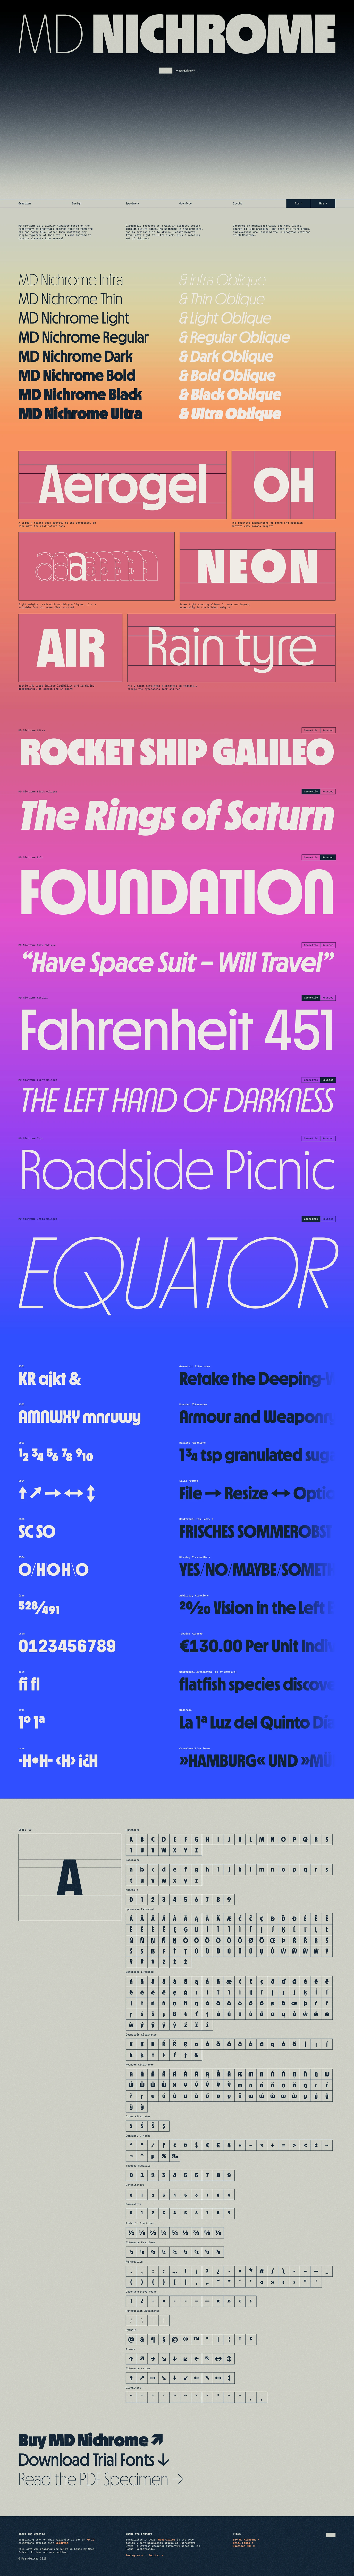 MD Nichrome by Mass-Driver Landing Page Example: MD Nichrome is a display typeface based on the typography of paperback science fiction from the 70s and early 80s. Rather than imitating any single typeface of this era, it aims instead to capture elements from several.